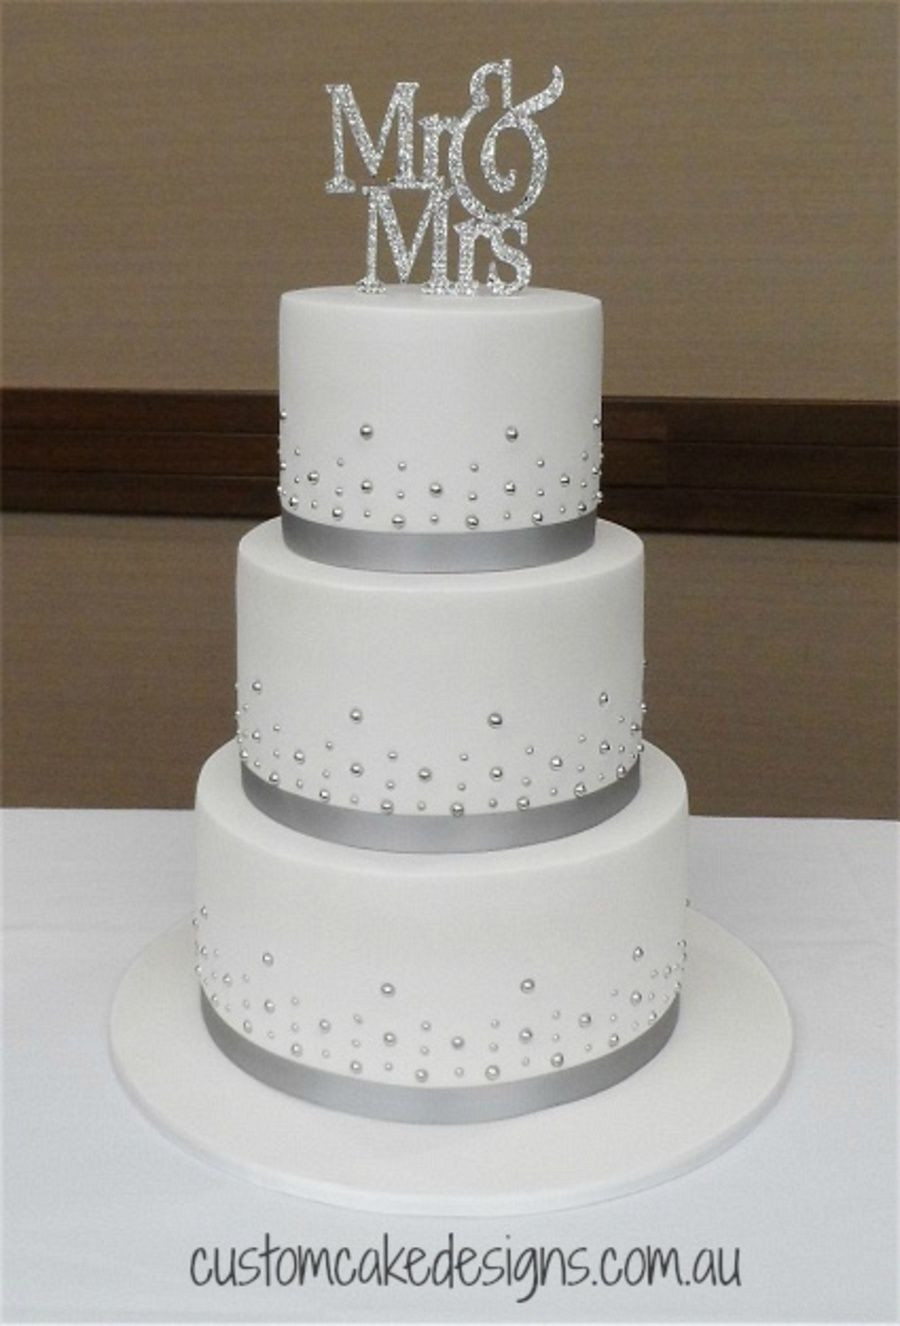 Easy Wedding Cake Recipes
 This elegant and simple design was chosen by the bride